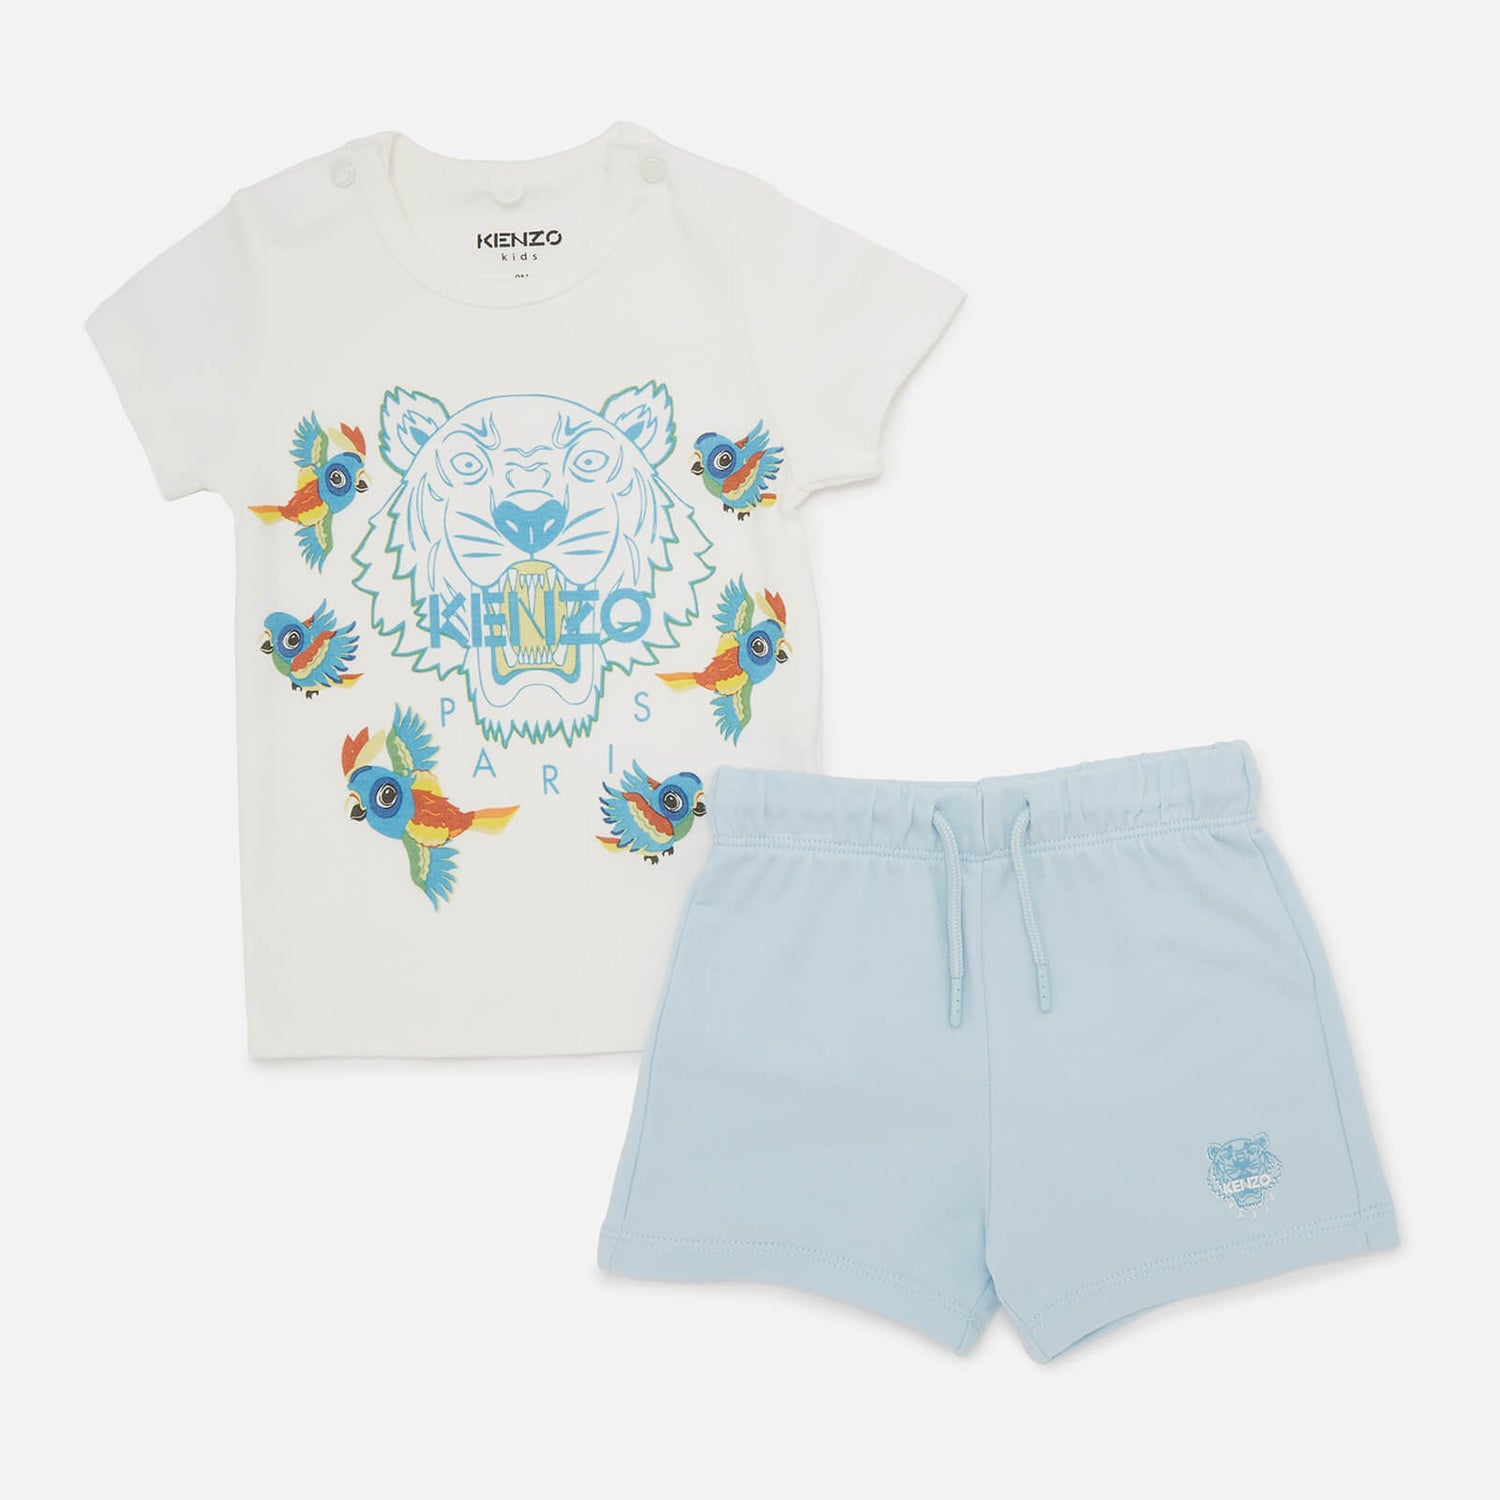 KENZO Babys' T-shirt and Shorts Set - Pale Blue - 12 Months